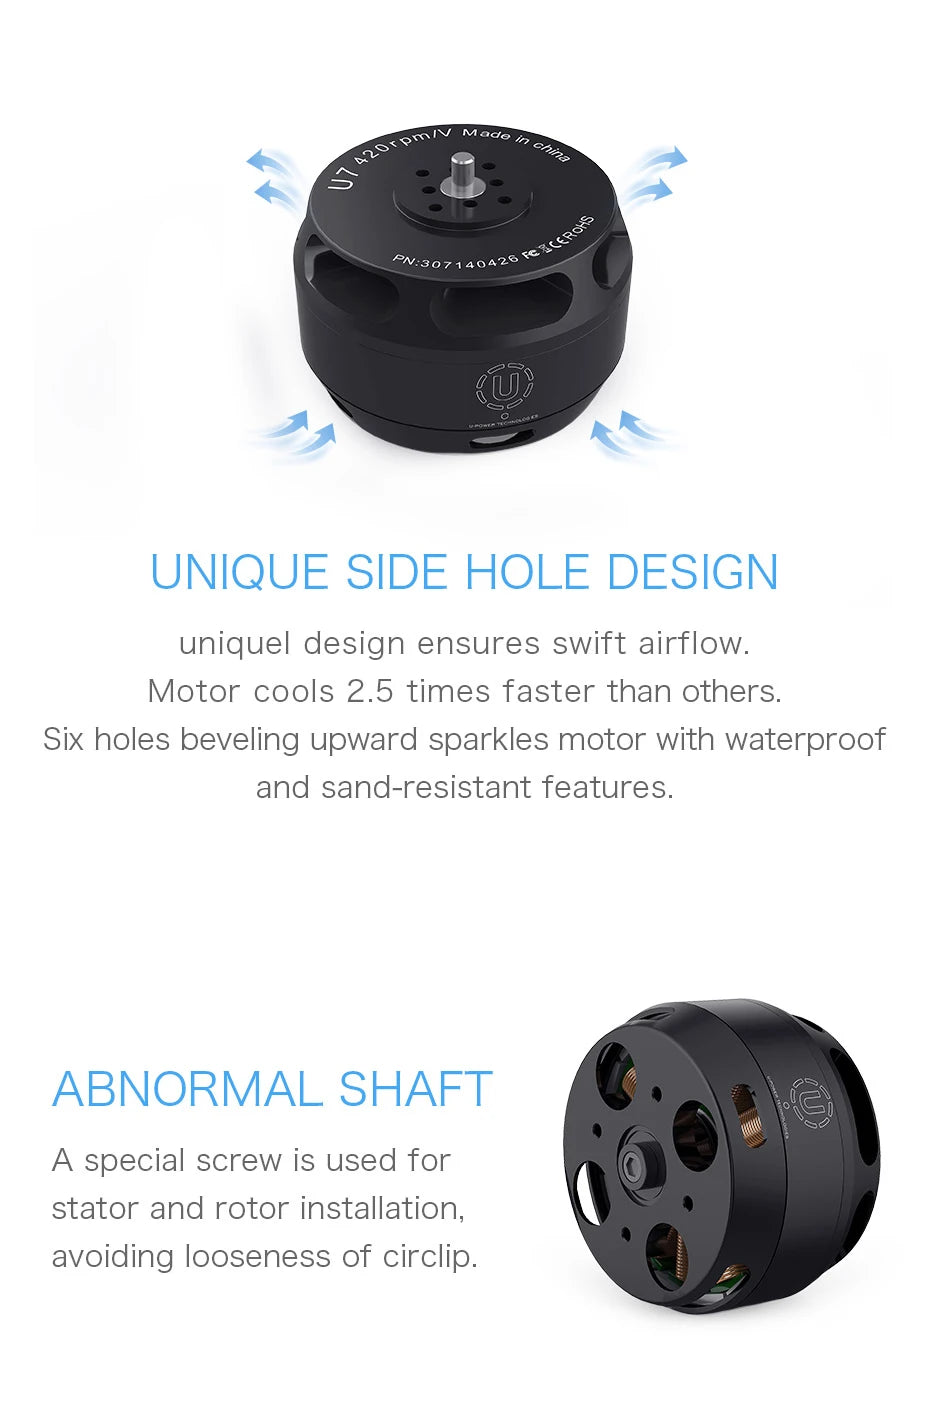 T-MOTOR, six holes beveling upward sparkles motor with waterproof and sand-resistant features 